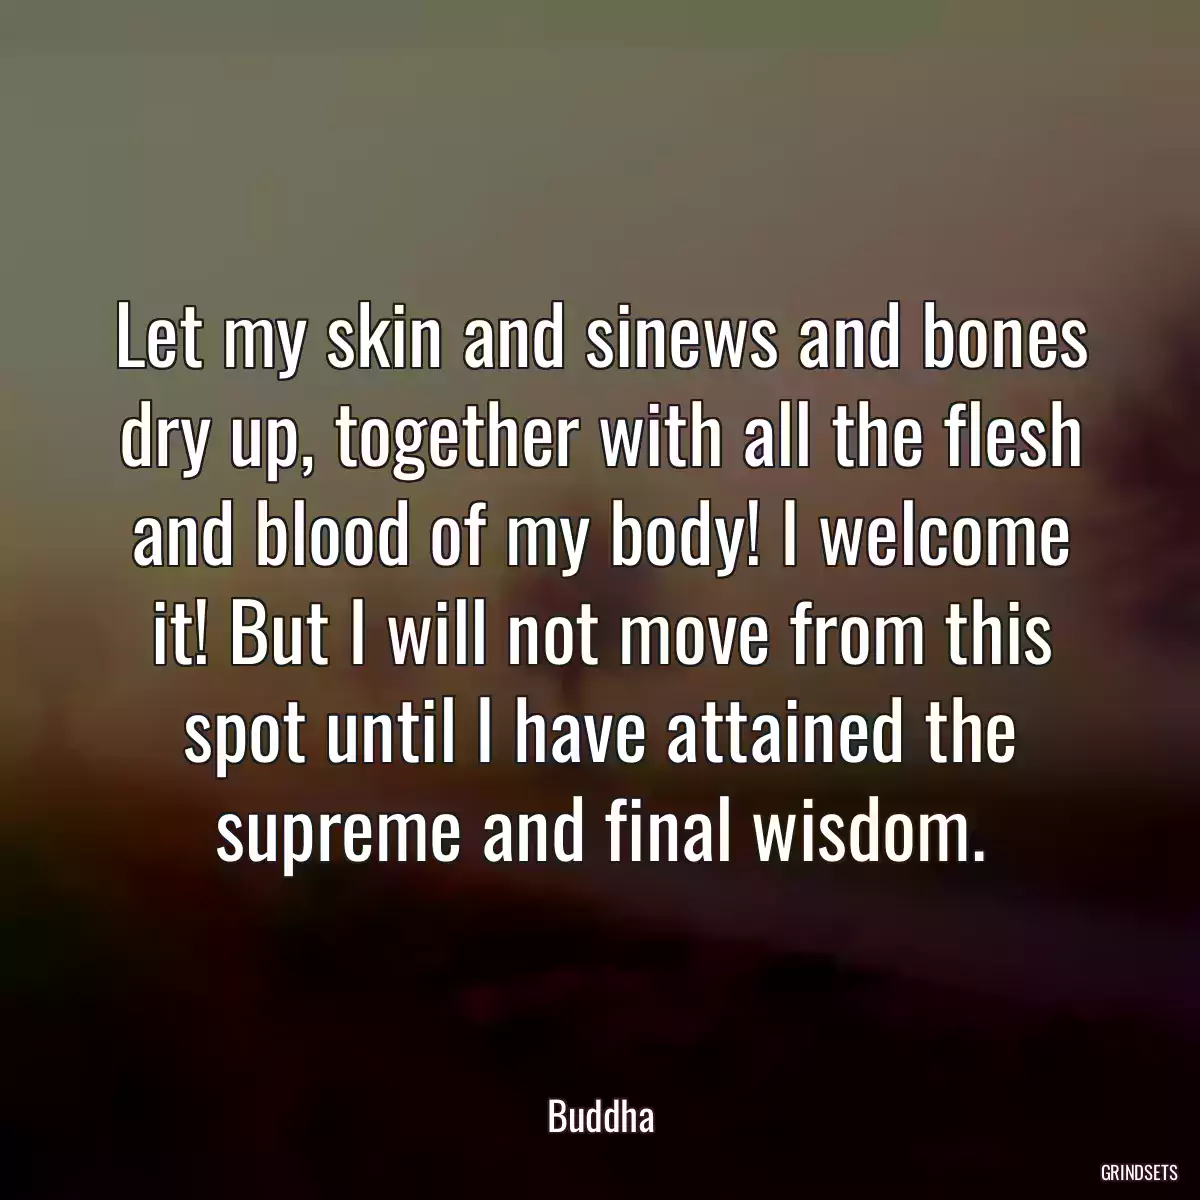 Let my skin and sinews and bones dry up, together with all the flesh and blood of my body! I welcome it! But I will not move from this spot until I have attained the supreme and final wisdom.